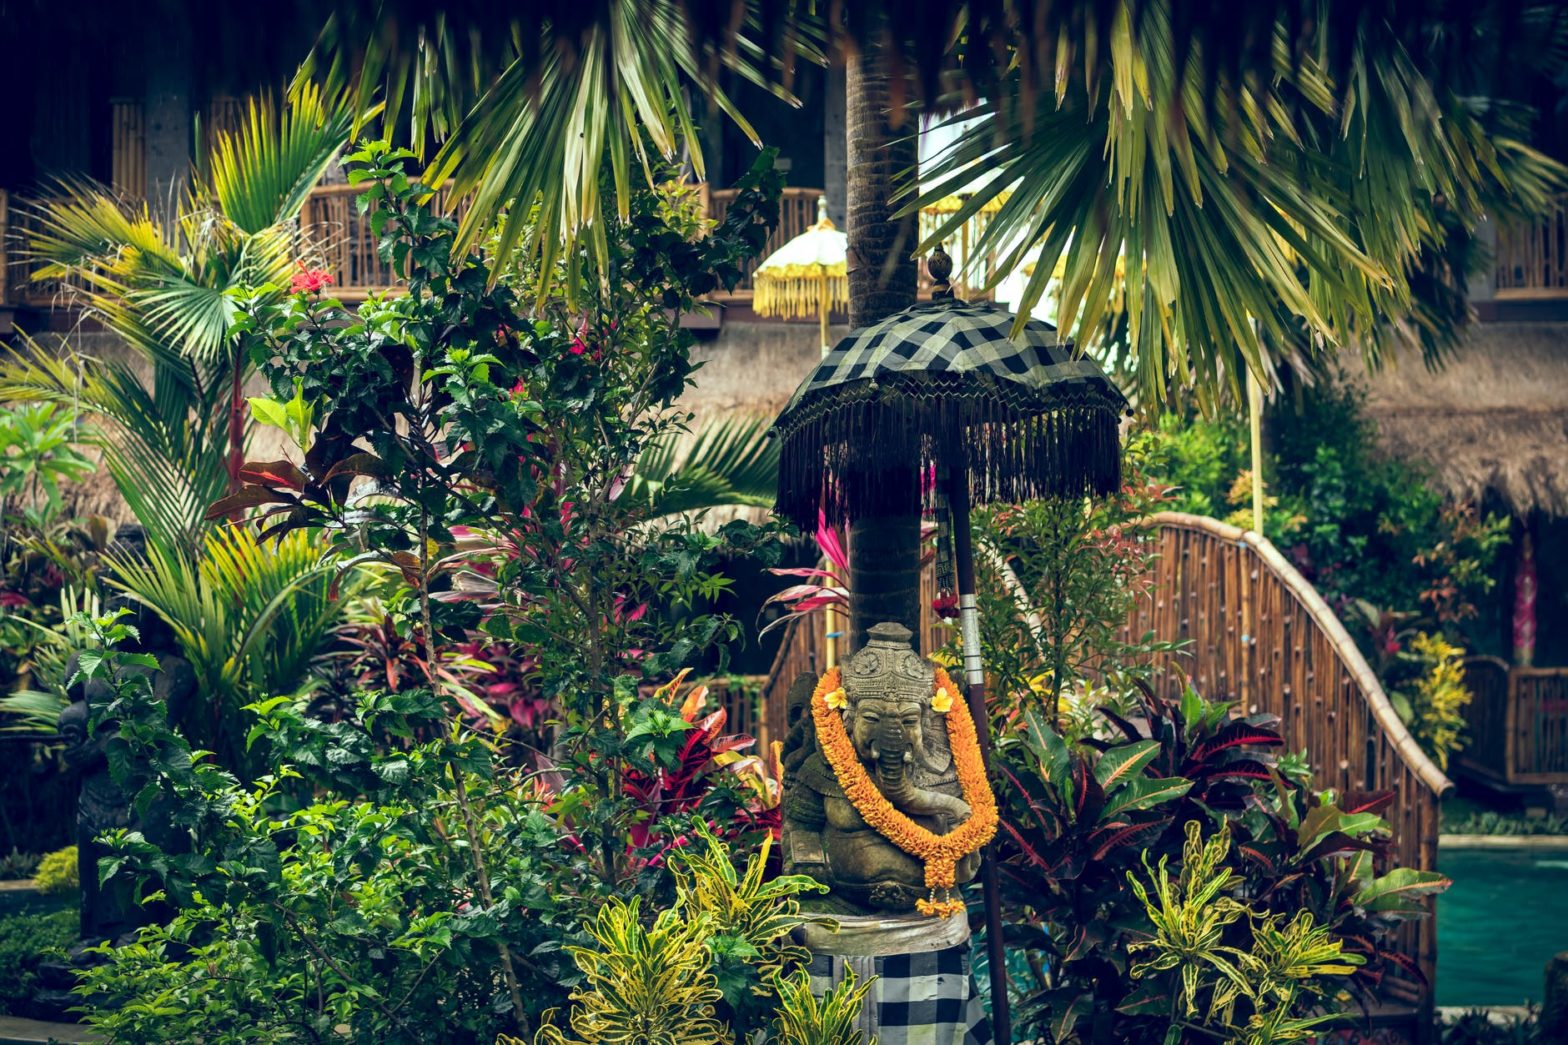 lush greenery in Bali - one of the best places to visit in April